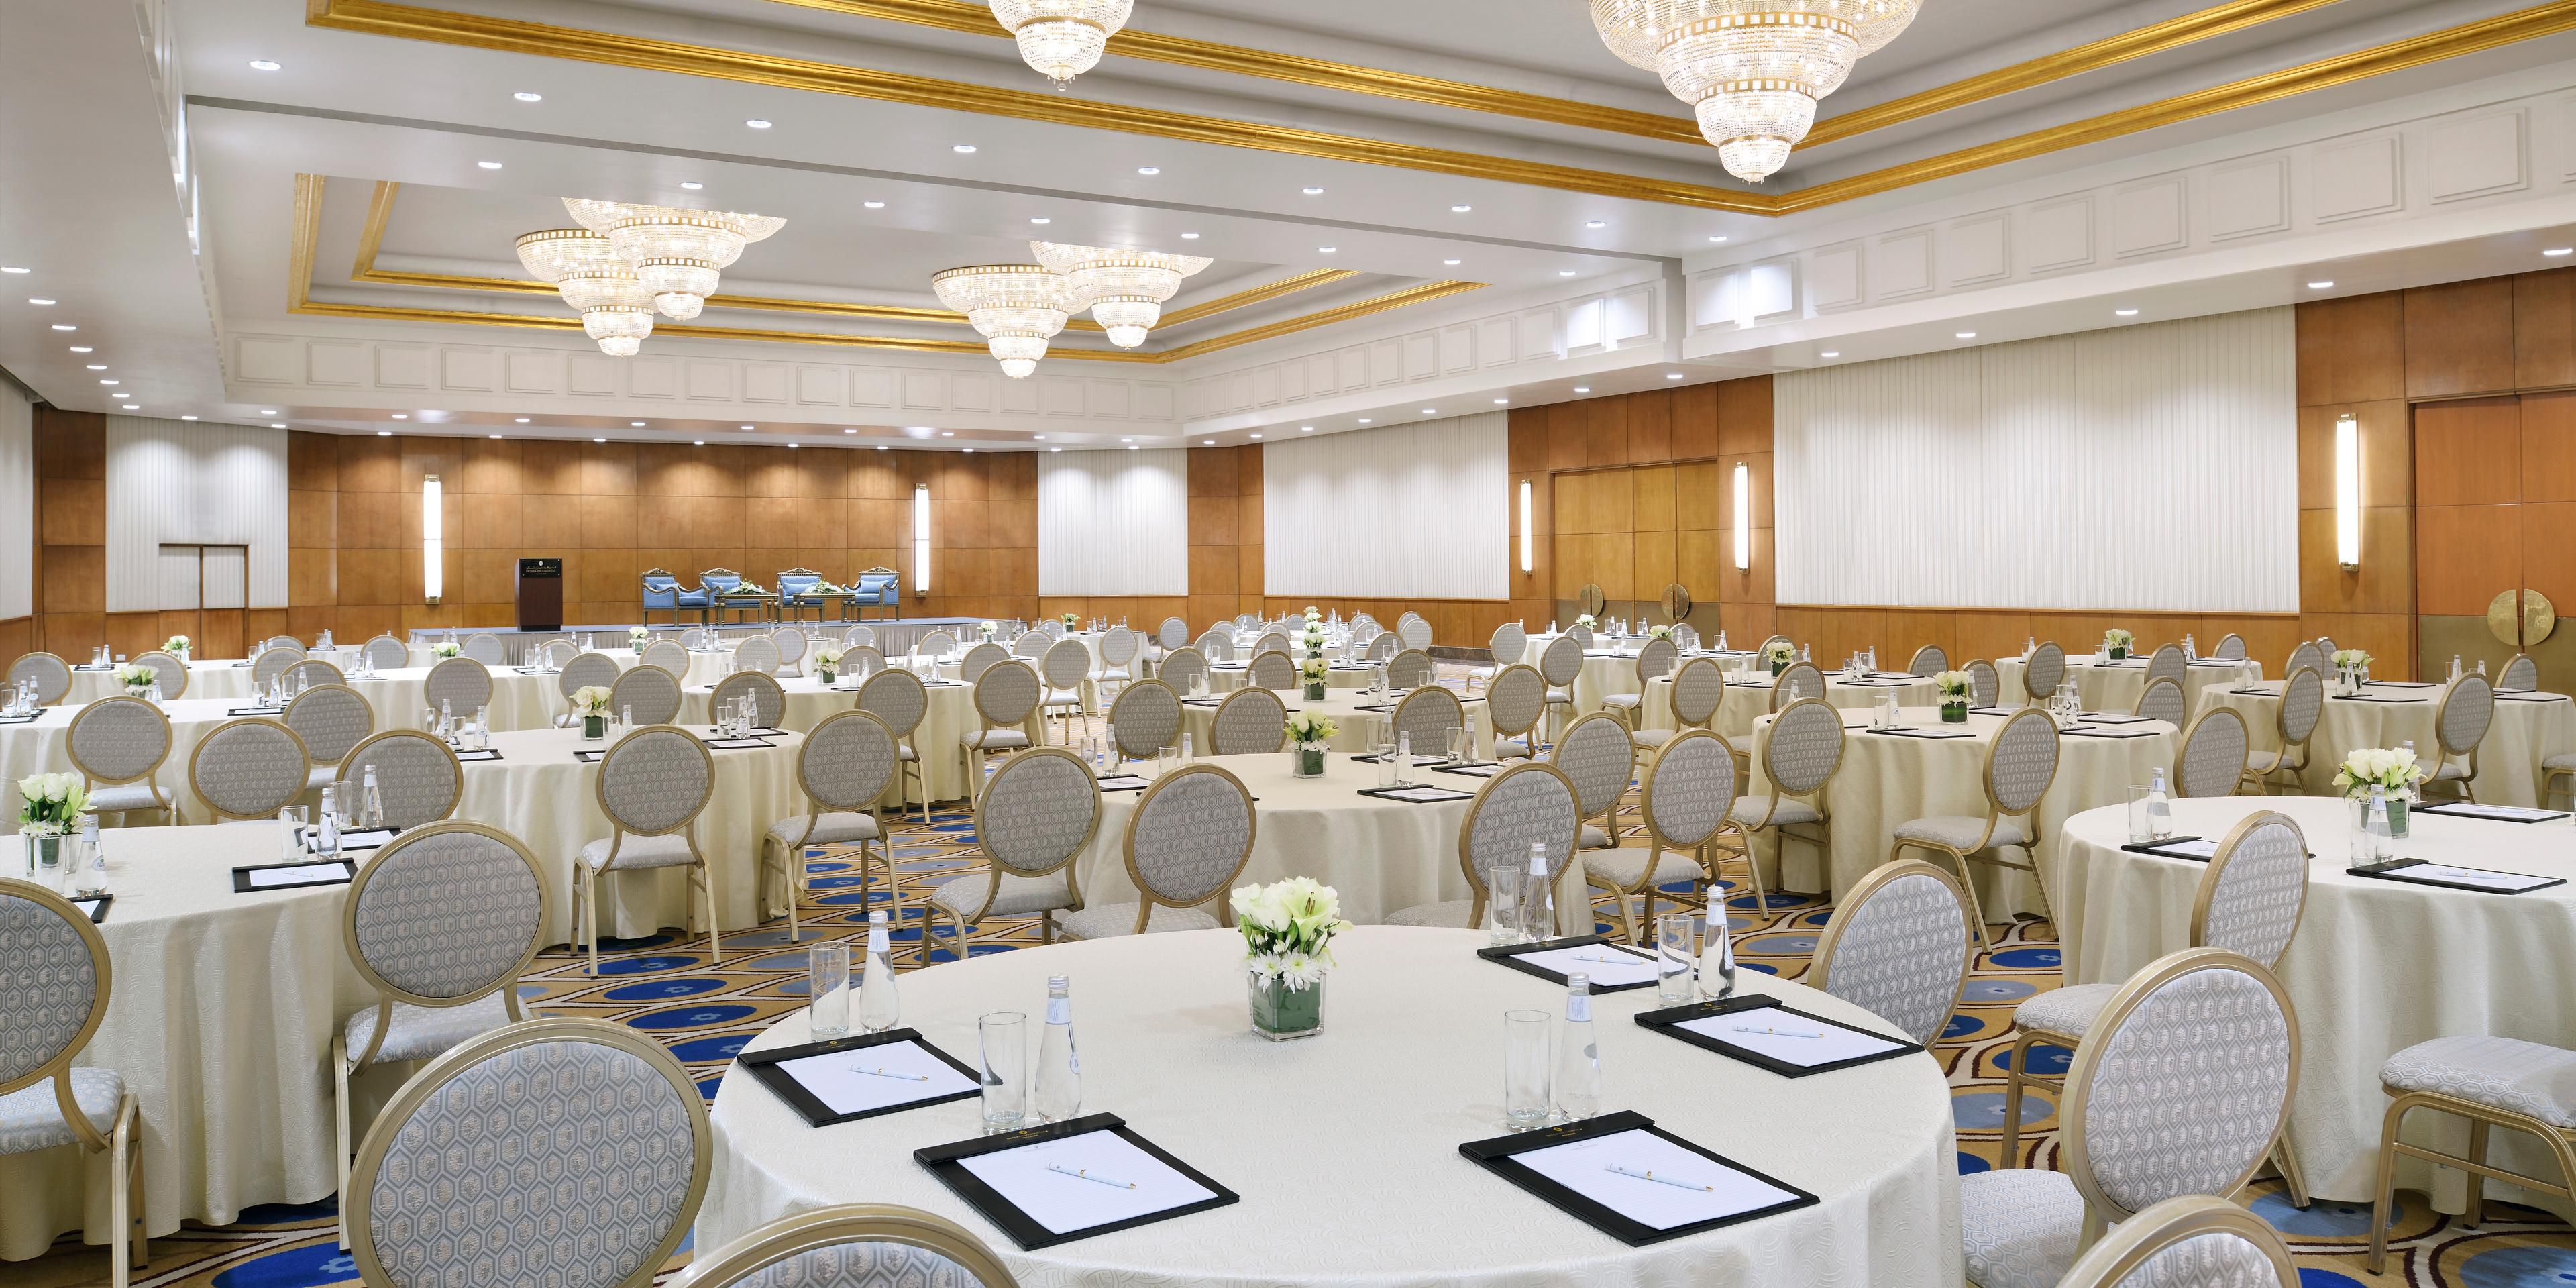 Recognized as a Leading Conference & Wedding Hotel for two consecutive years in a row, our stunning property features 13 versatile event rooms; while our legendary Buraidah Hall accommodates up to 1,500 guests. Our catering options include Local Origins (signature dishes inspired by our location), World Kitchen (international), and Vegetarian fare.